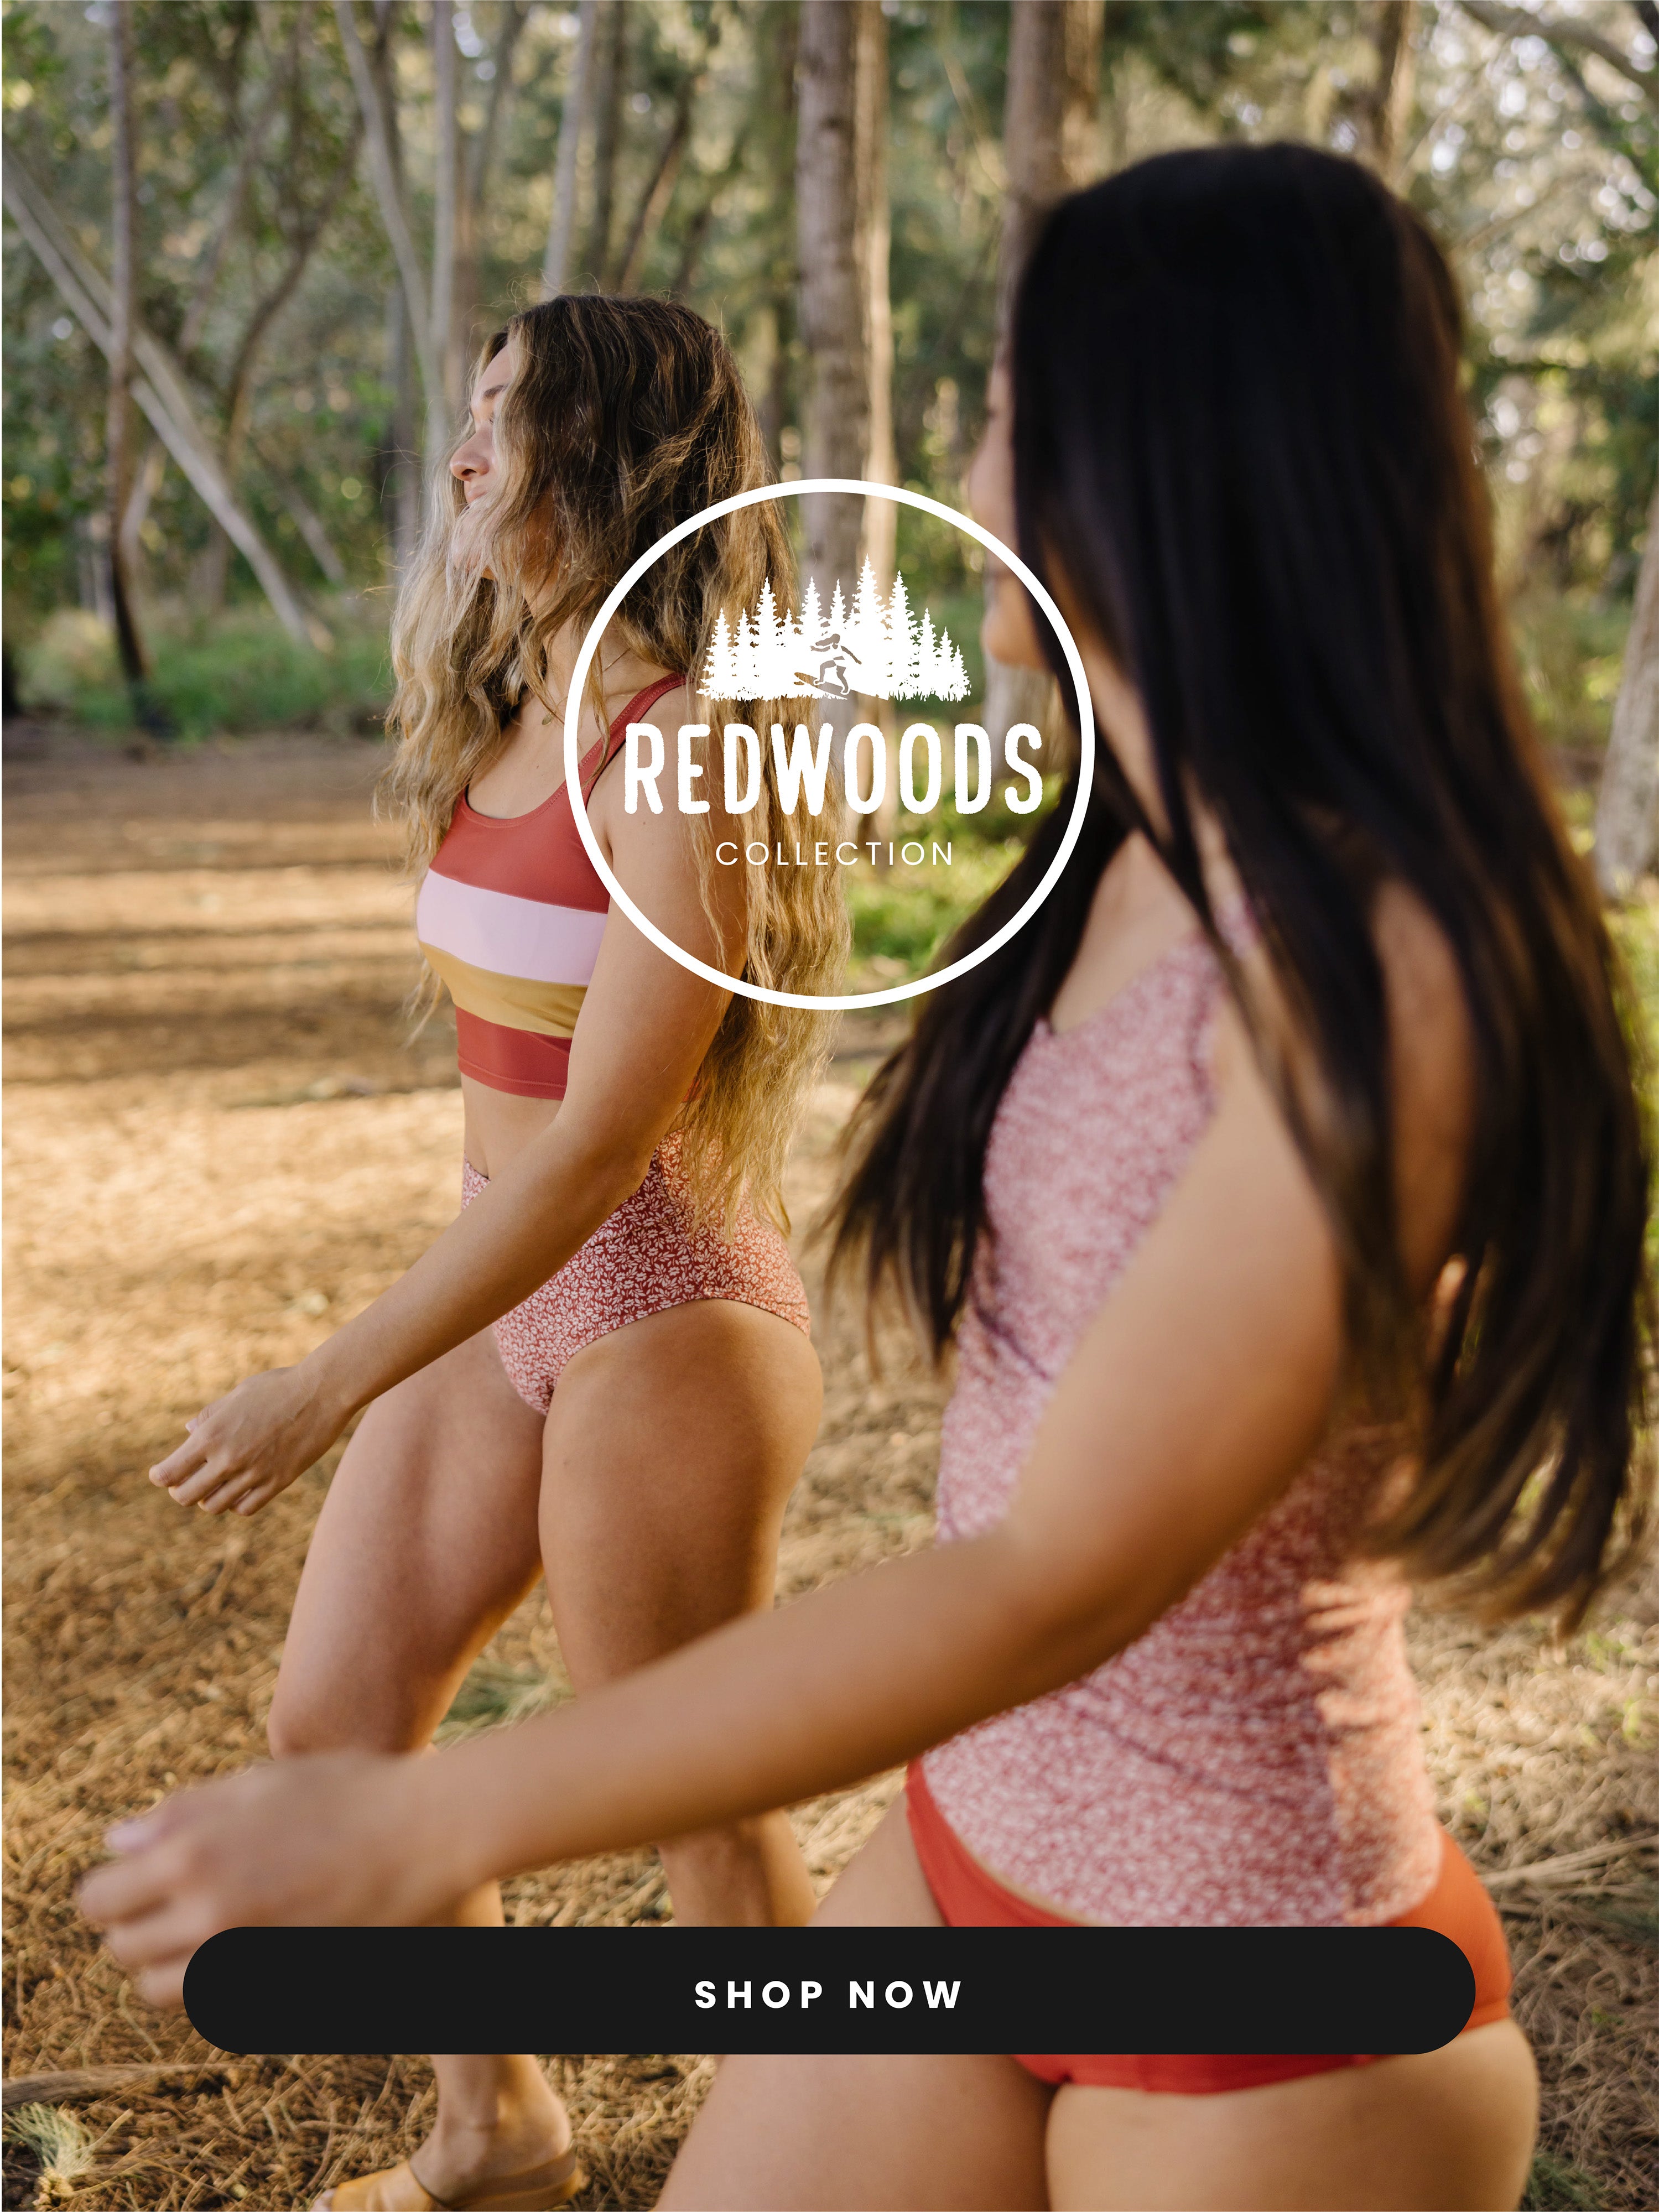 Redwoods Collection Image